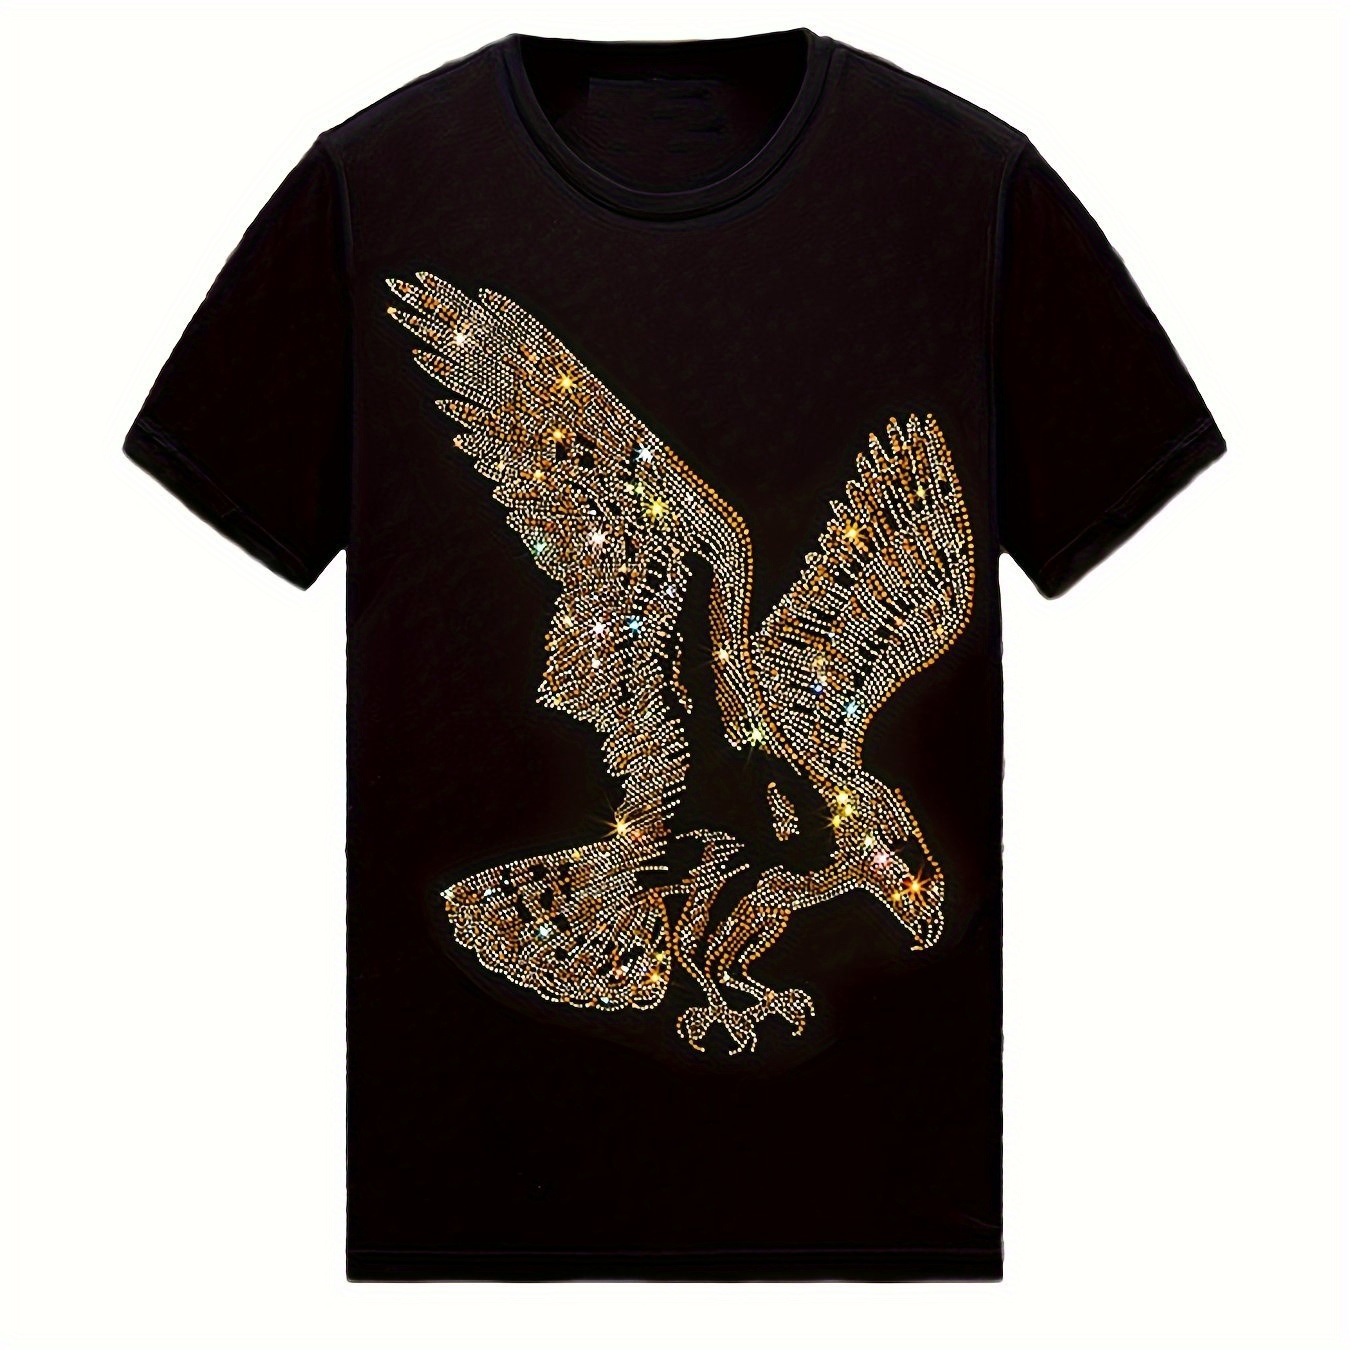 

Rhinestone Eagle Cotton T Shirt, Casual Crew Neck Tees For Men, Graphic Tees For Men, Short Sleeve Tshirt For Summer Spring Fall, Tops As Gifts